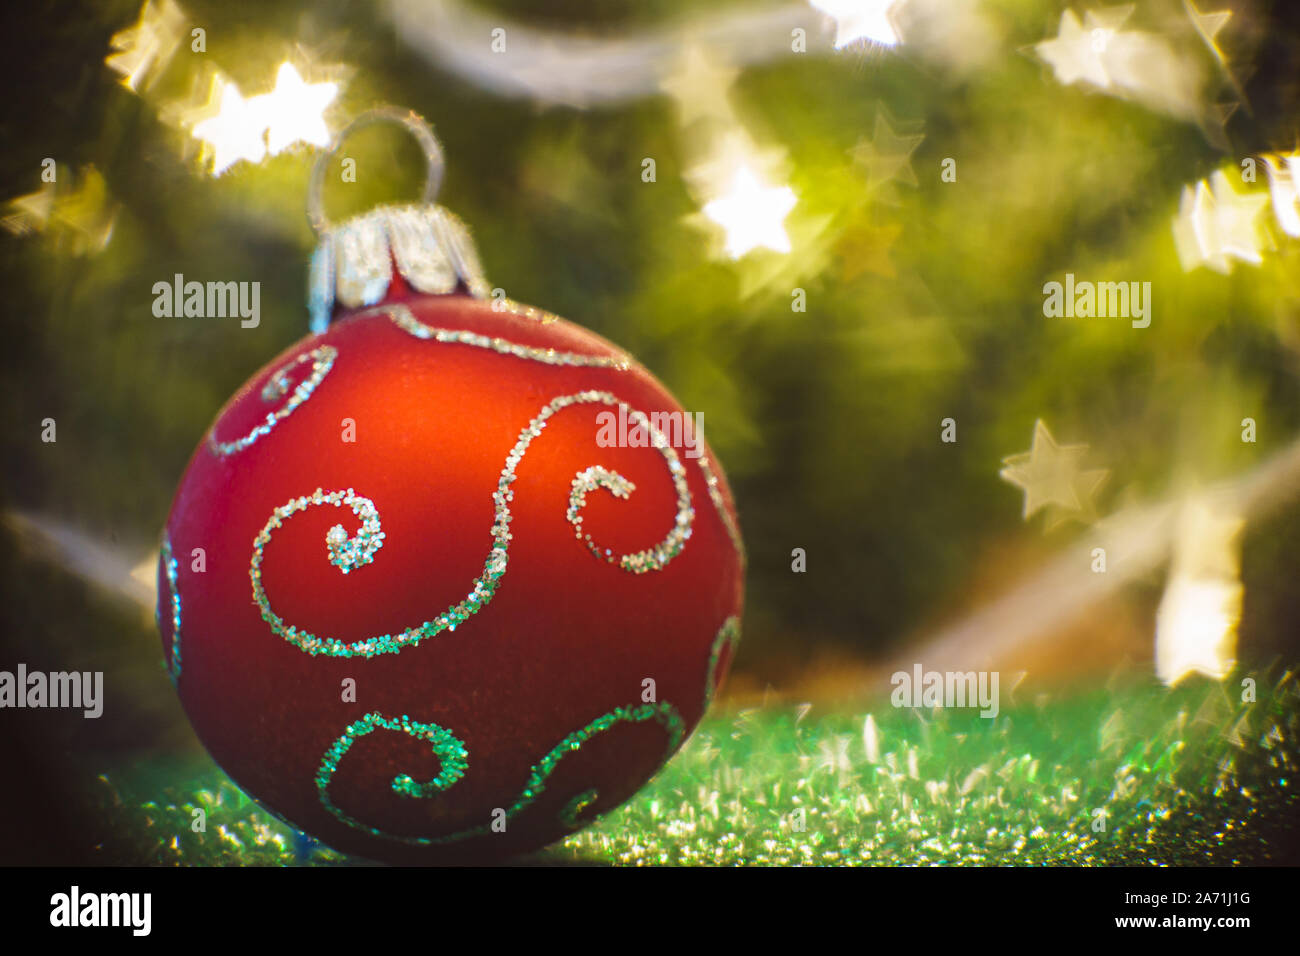 Red Christmas ornament ball with golden design and blurry star shaped lights background Stock Photo